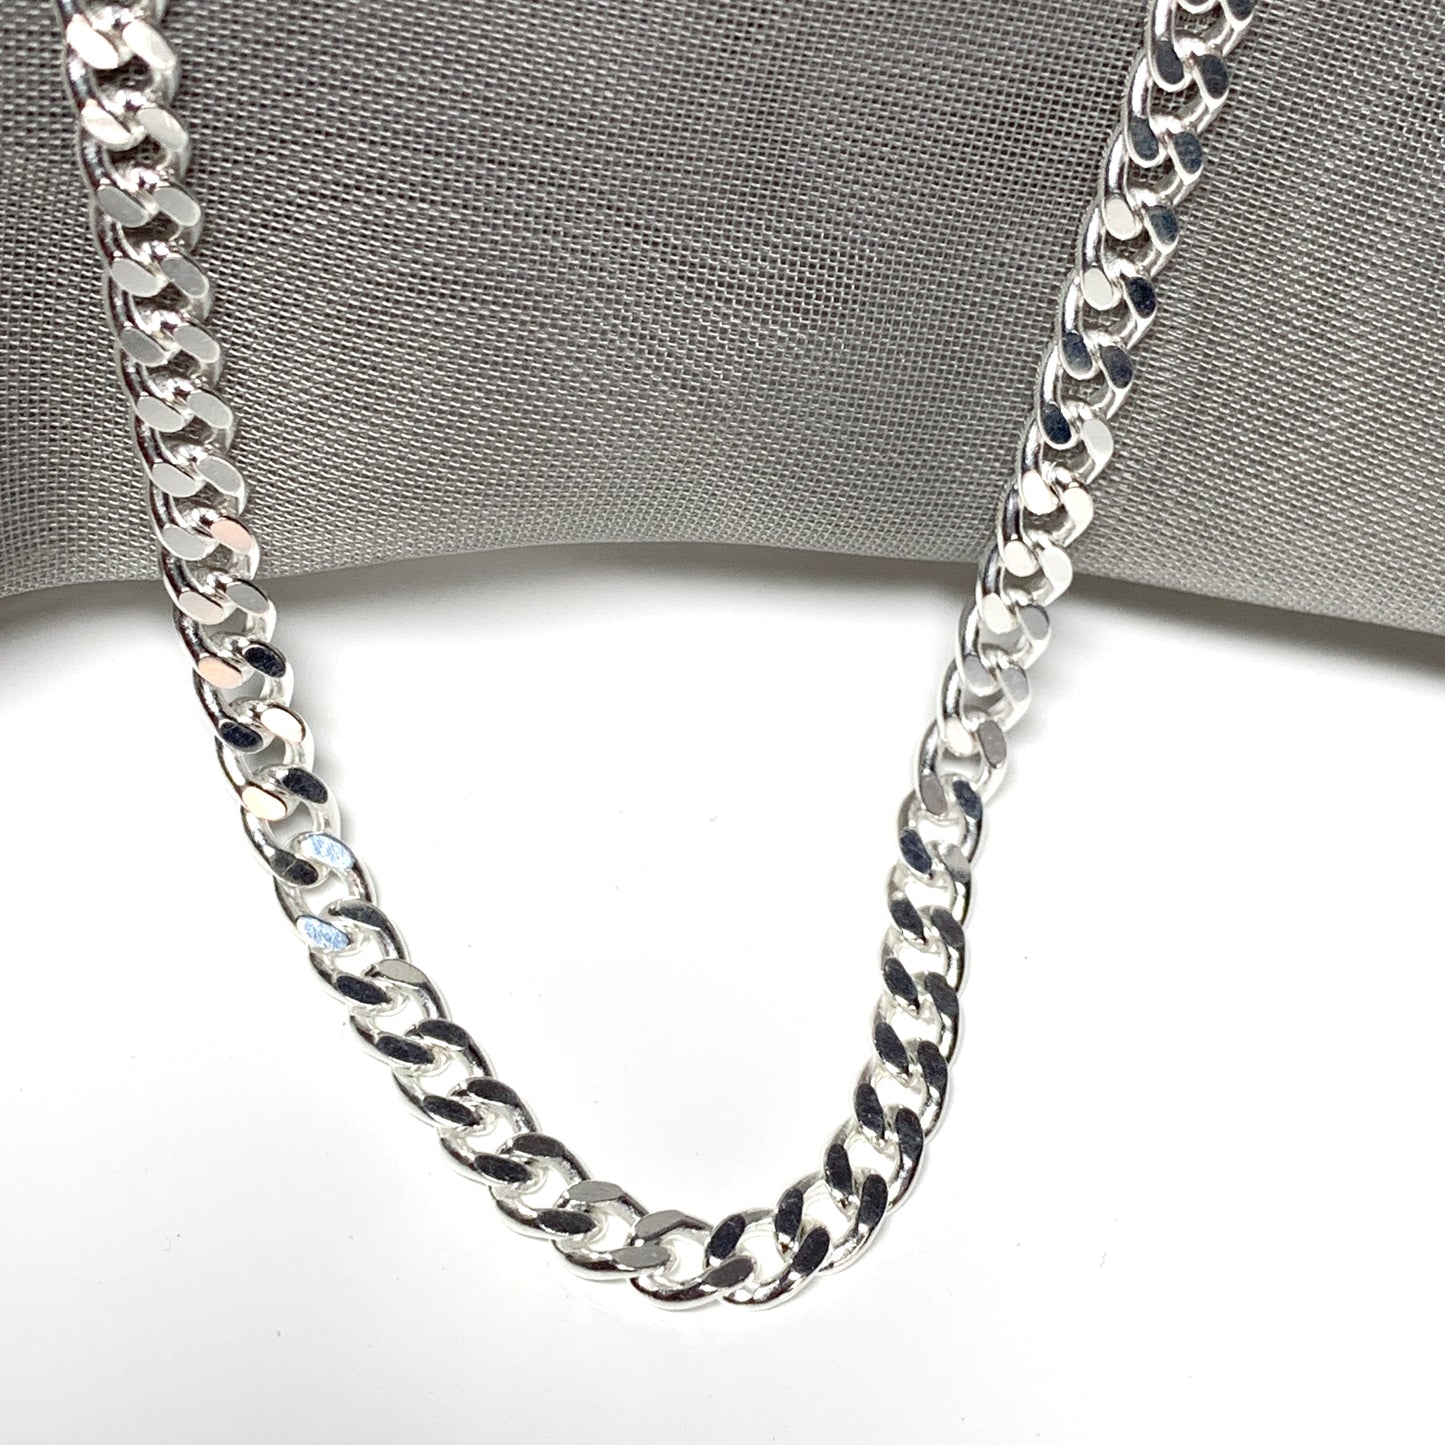 Mens solid sterling silver curb necklace